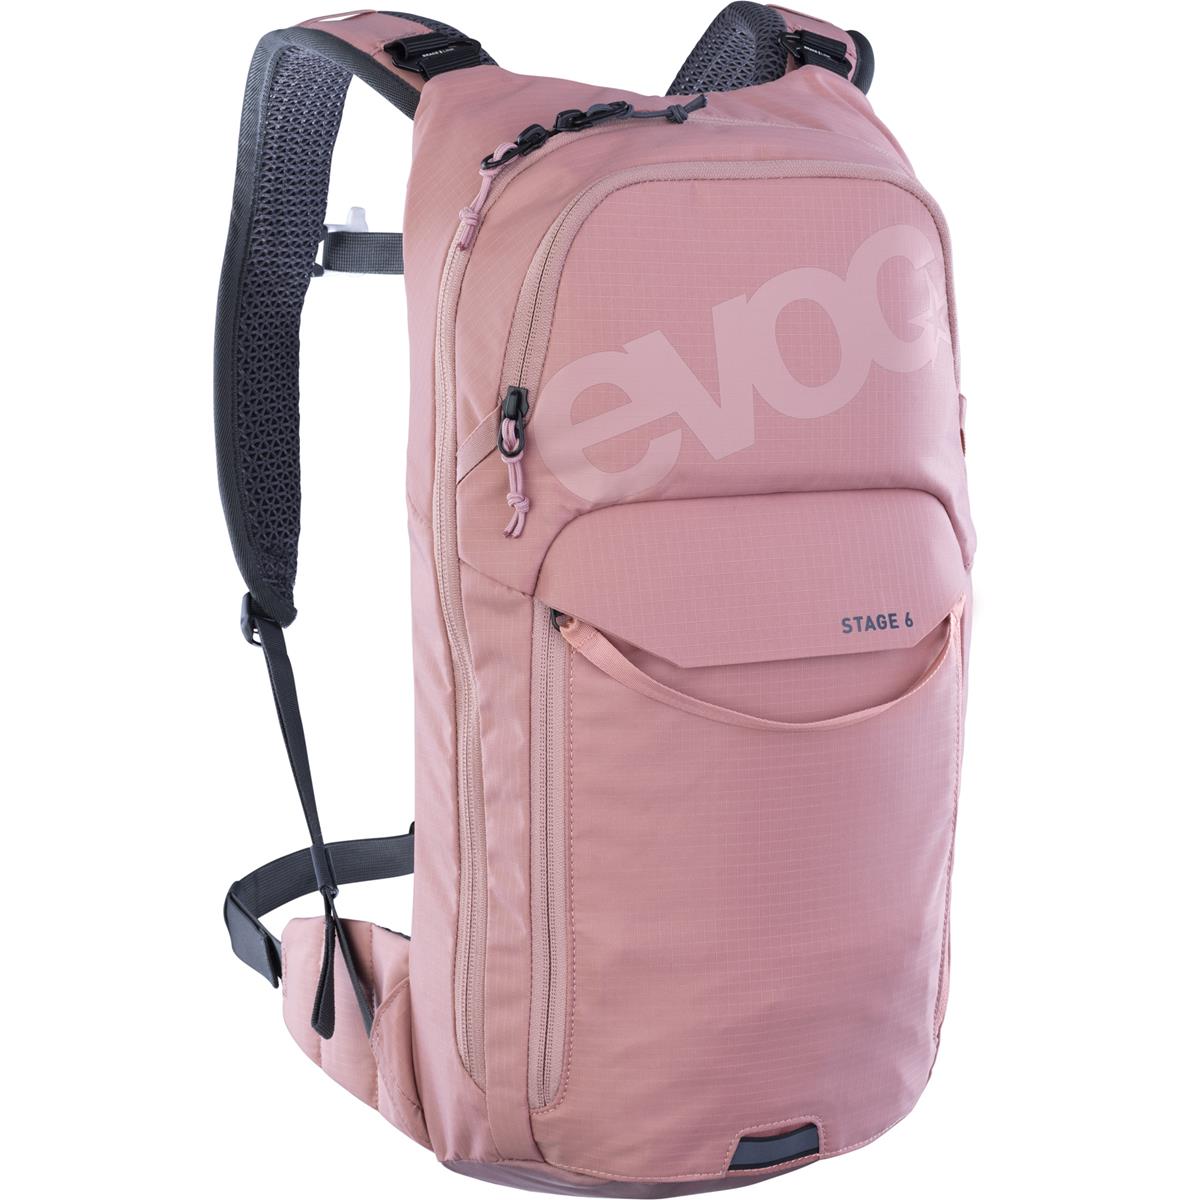 Evoc Backpack with Hydration System Compartment Stage 6 + Dusty Pink